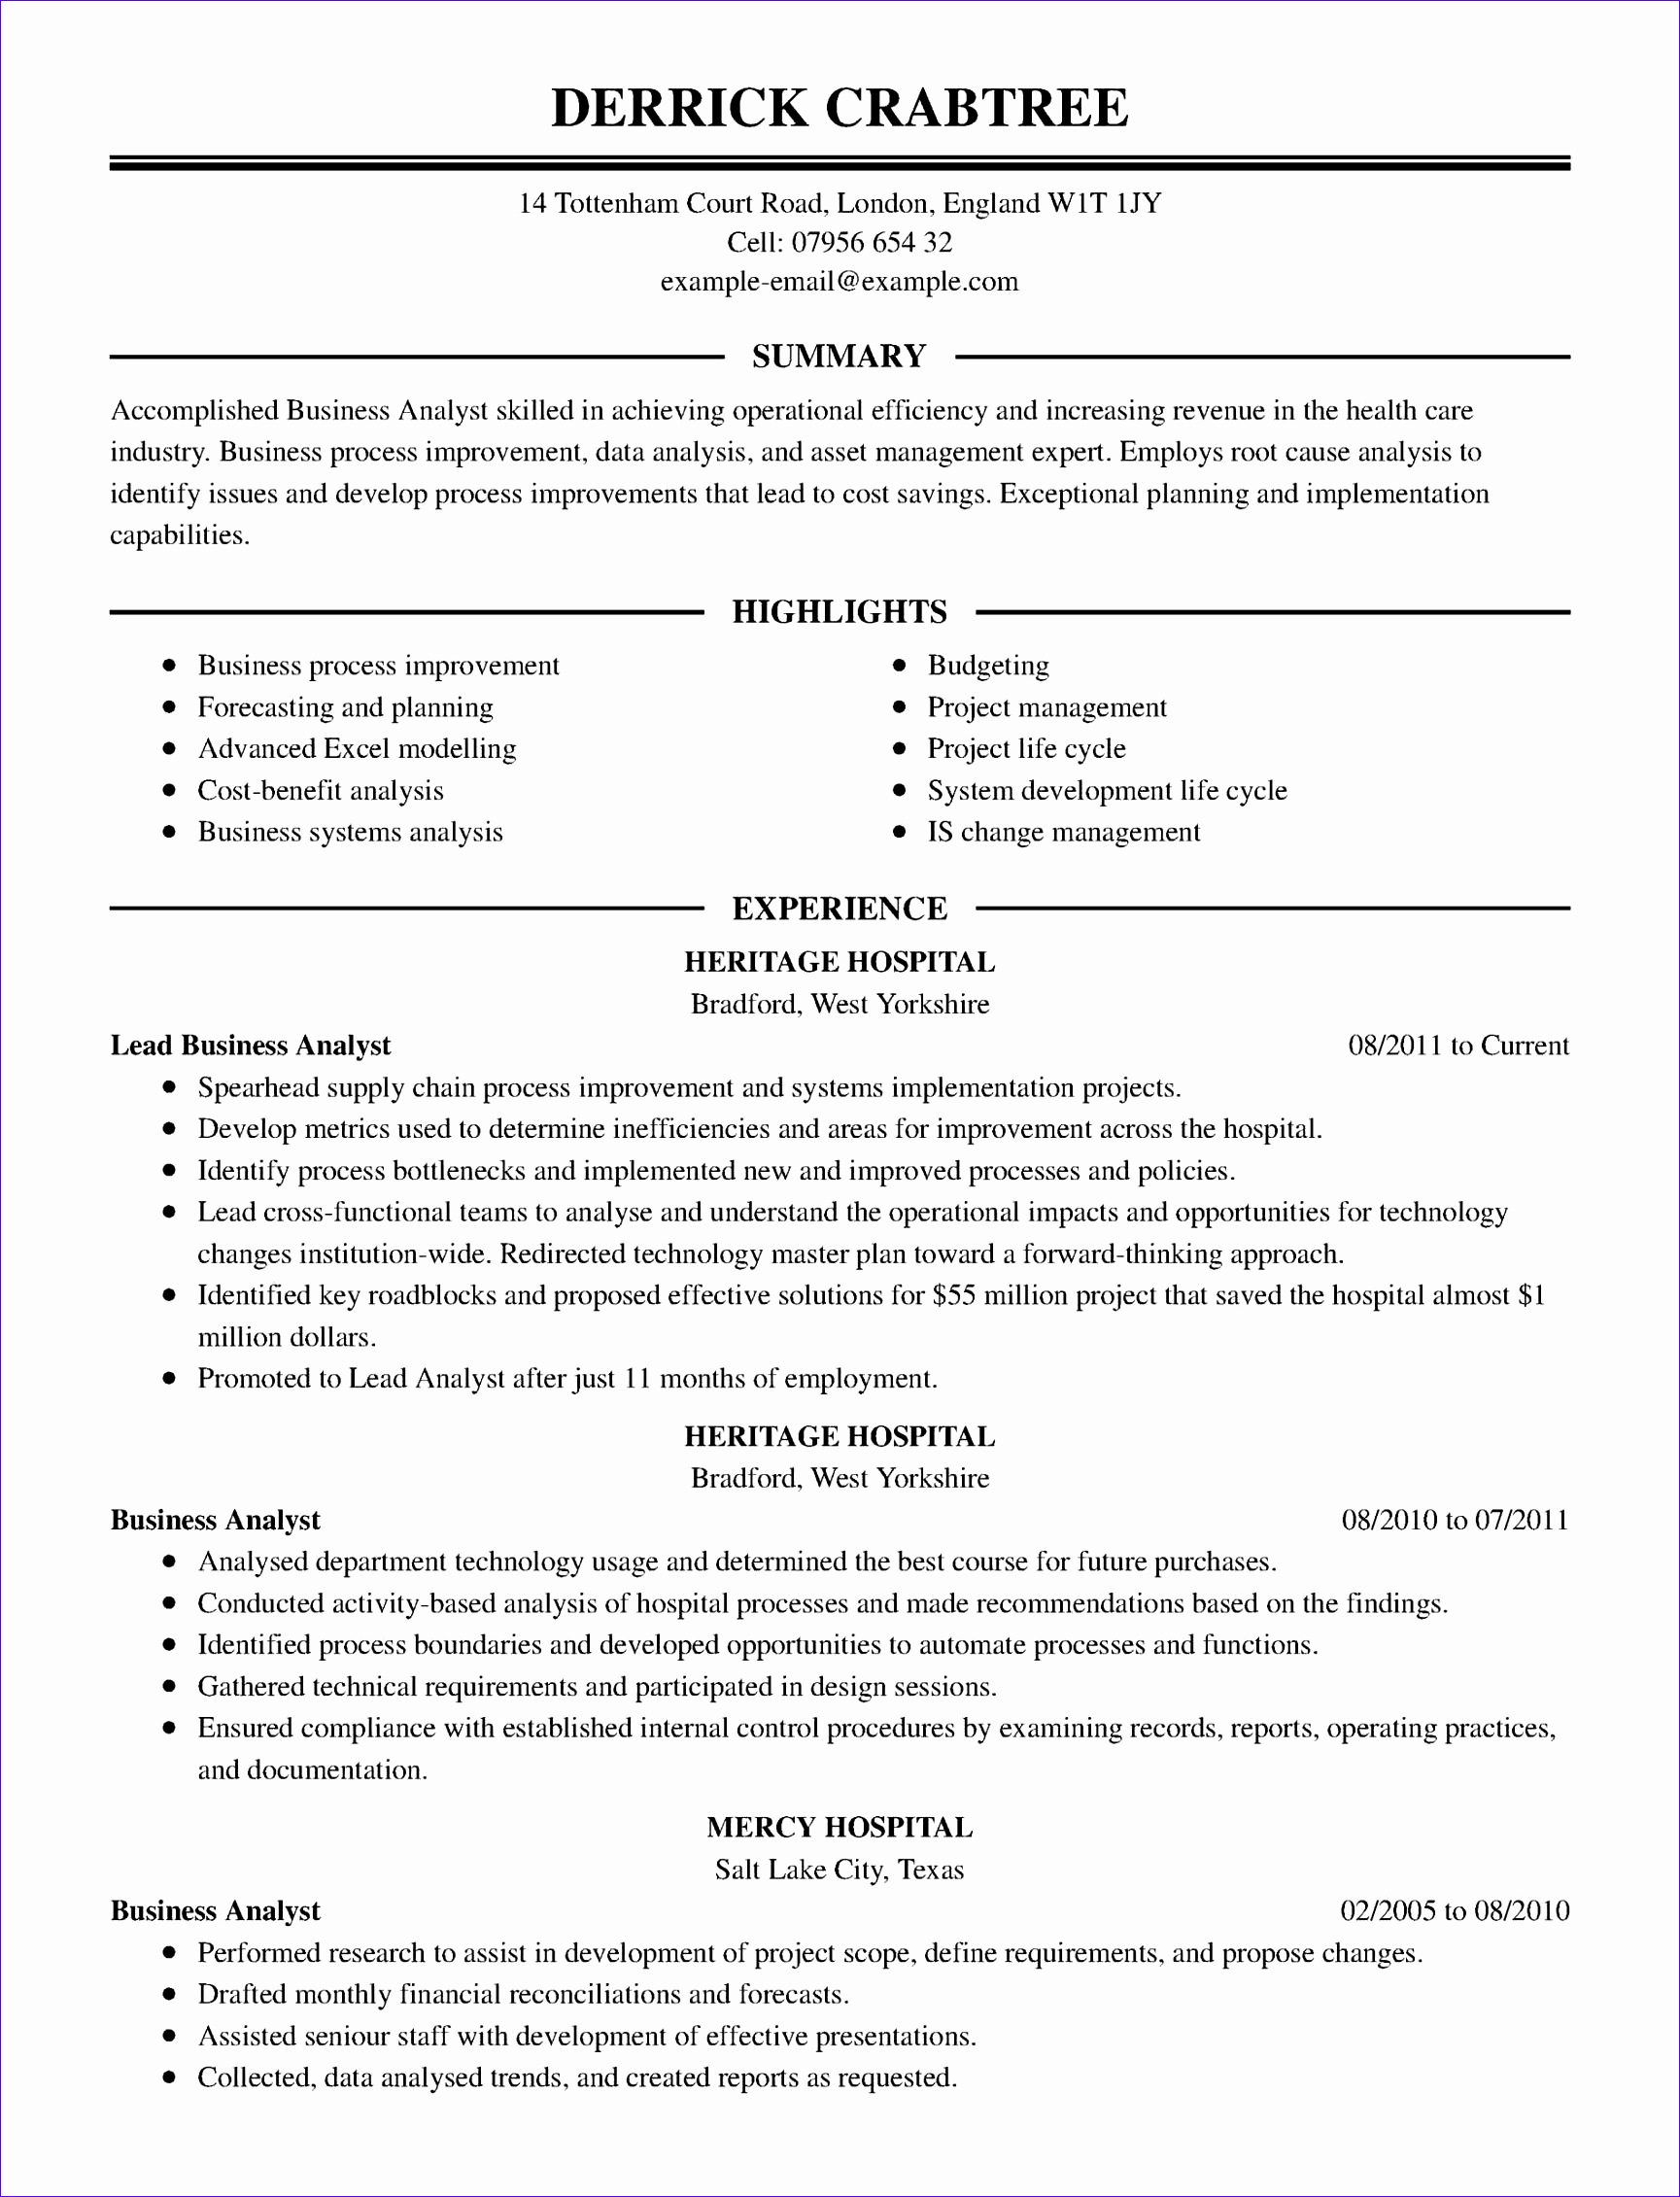 classy moving pany resume template with additional pany resume examples of moving pany resume template